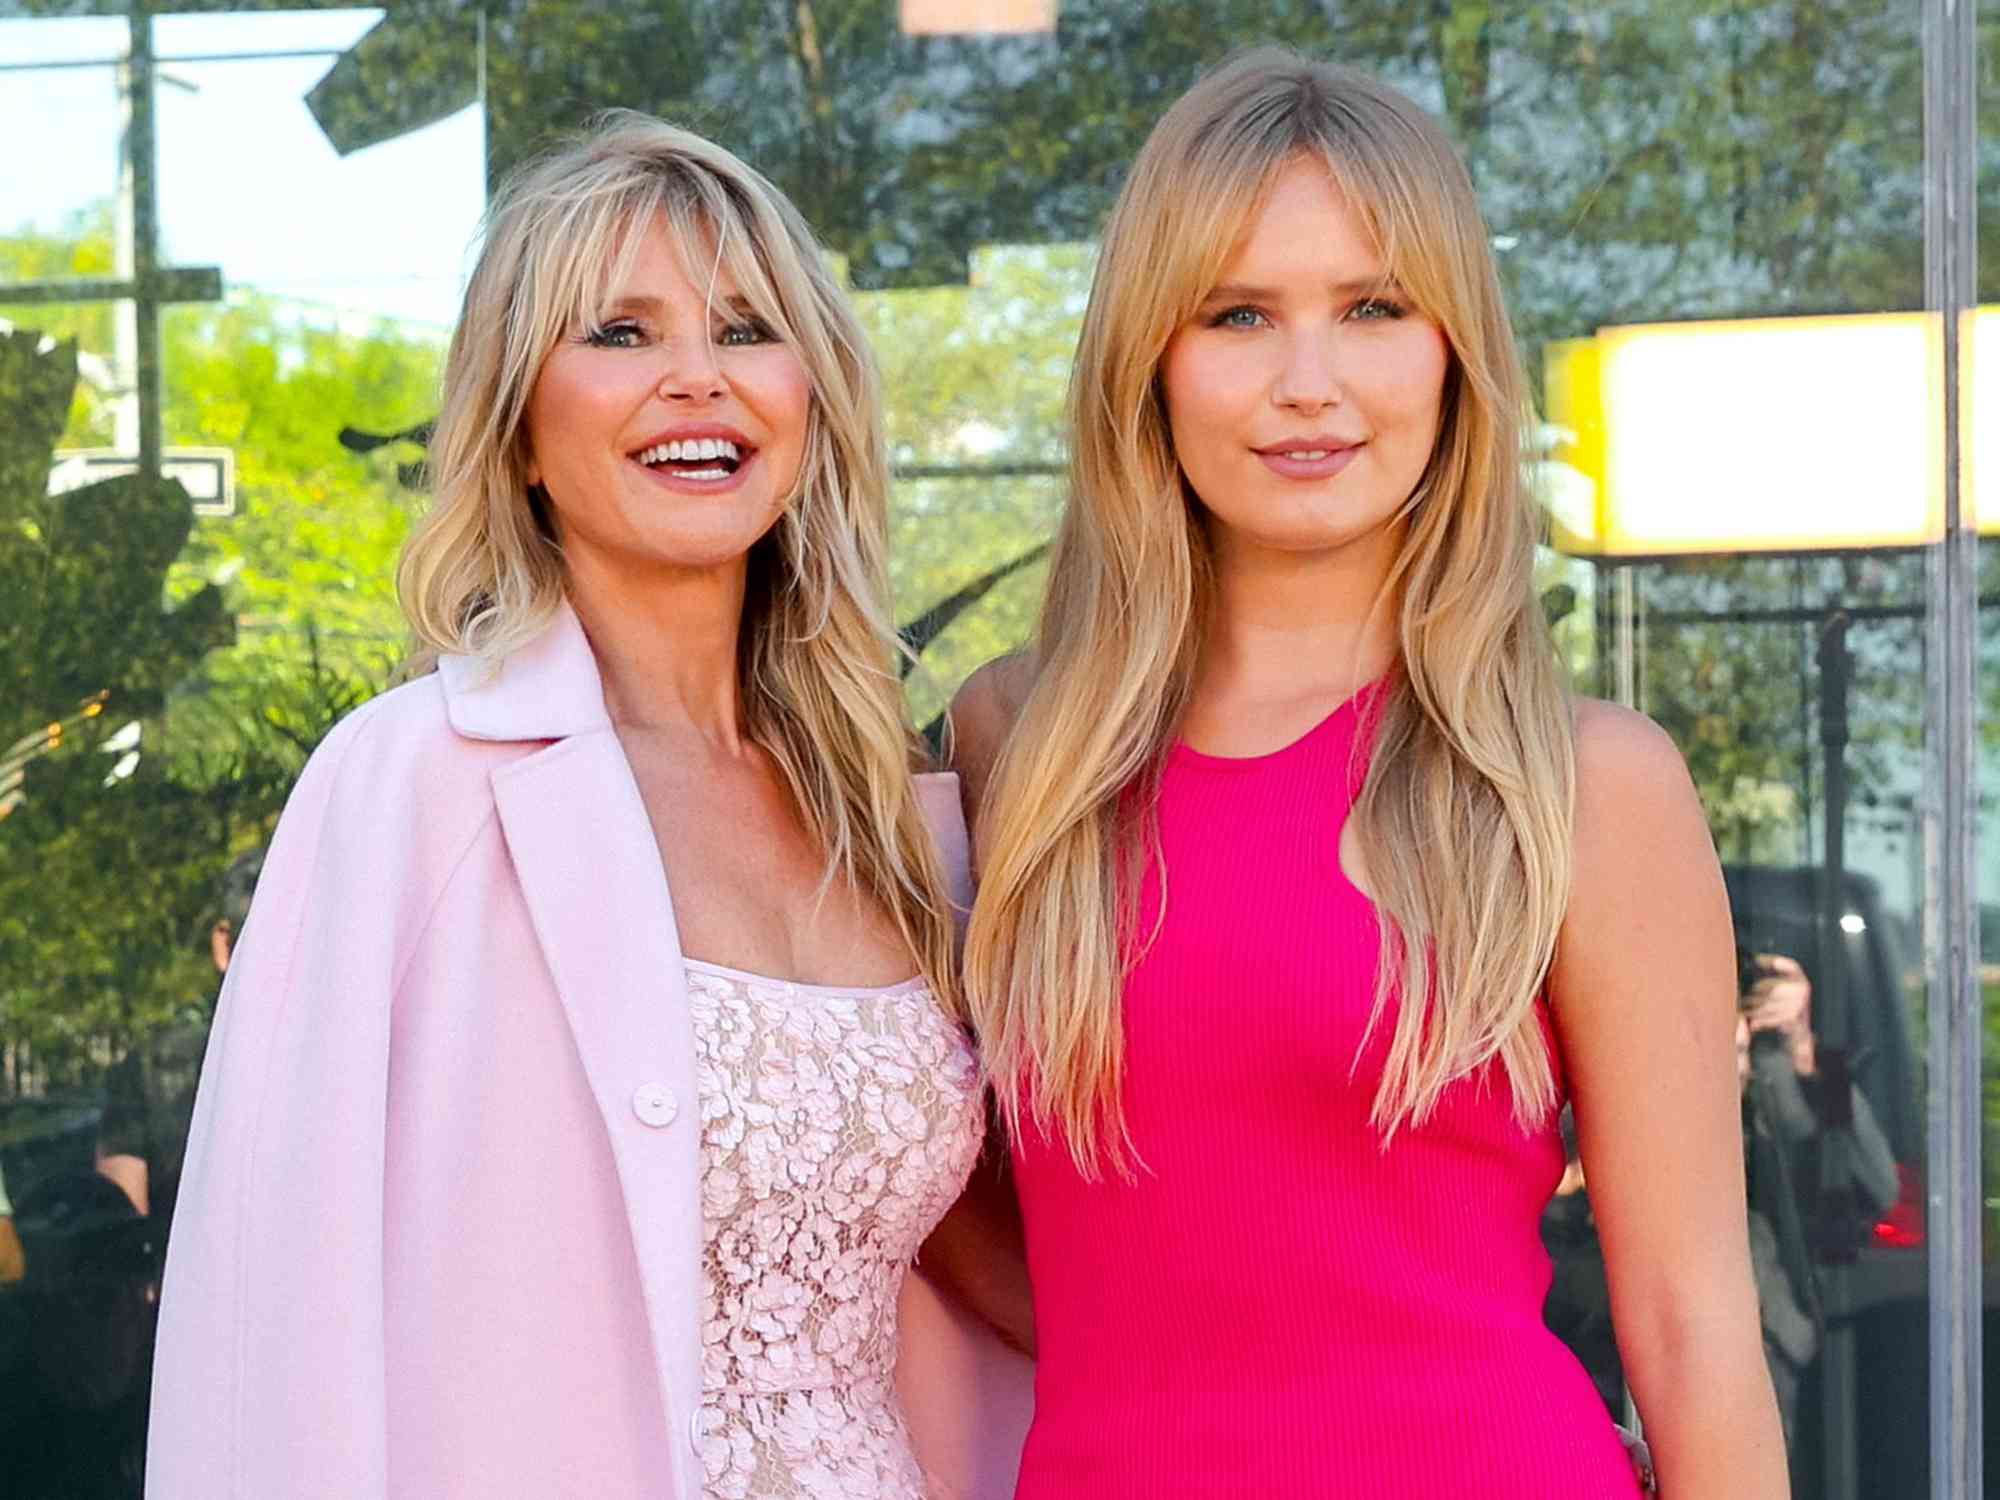 Christie Brinkley and Sailor Brinkley are seen arriving at the 'Michael Kors' Fashion Show on September 14, 2022 in New York City